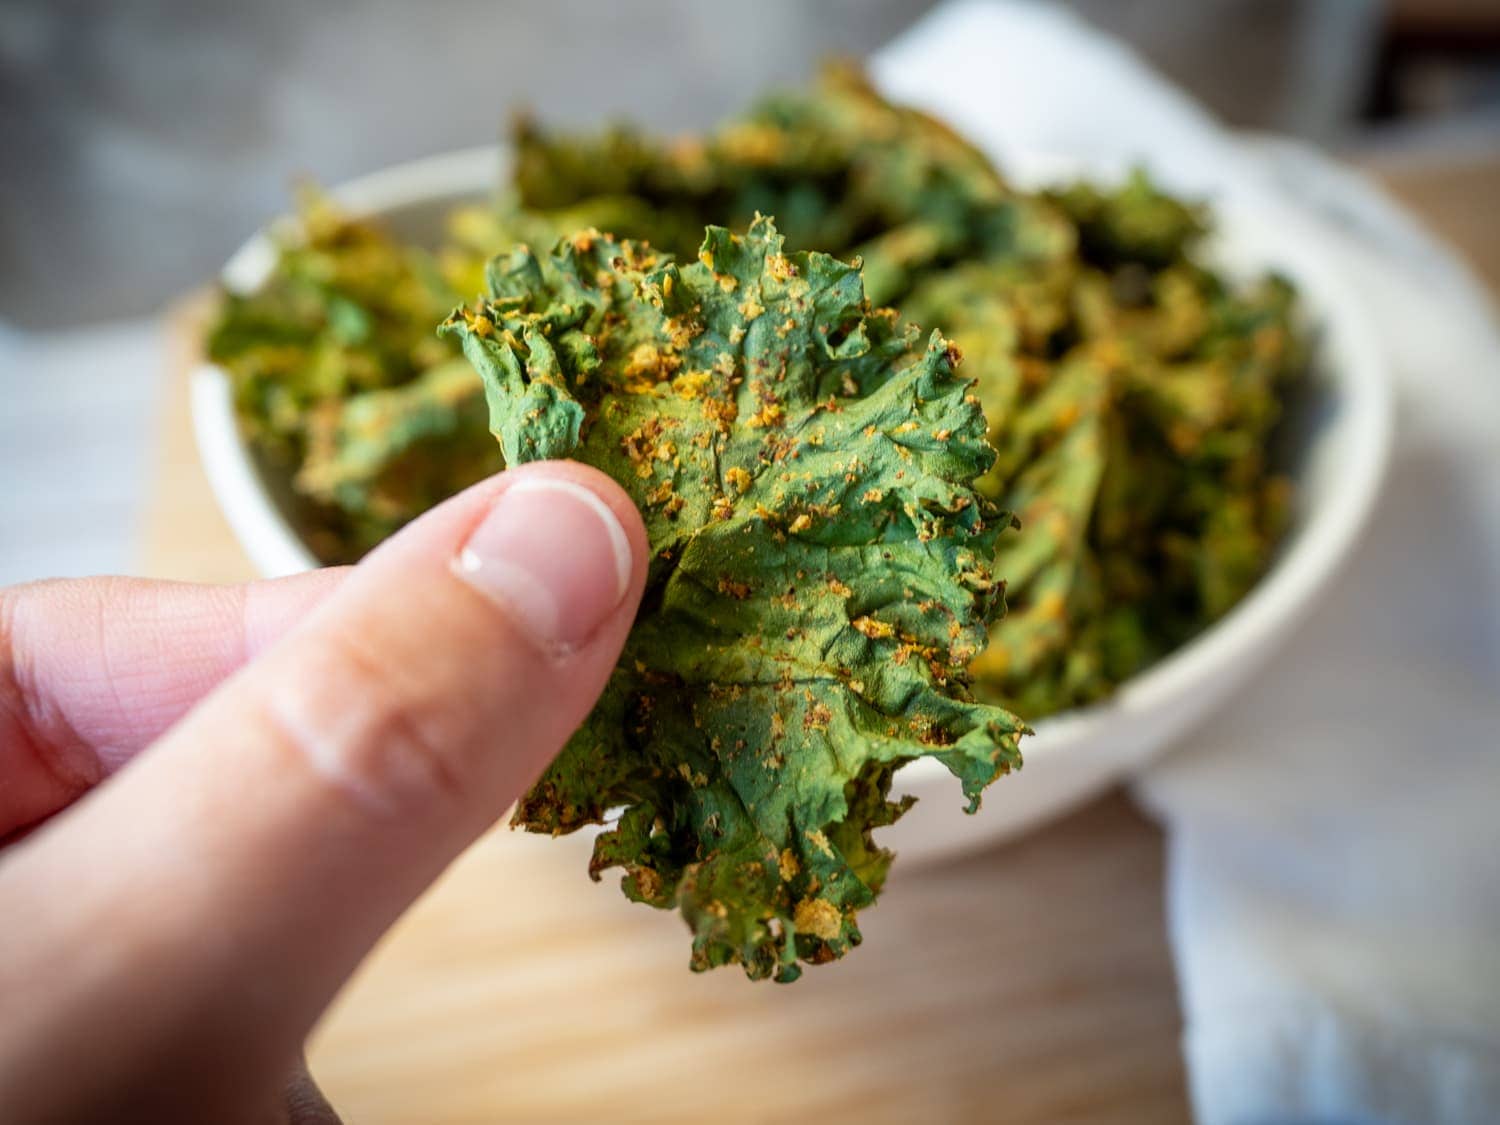 Fingers holding a kale chip